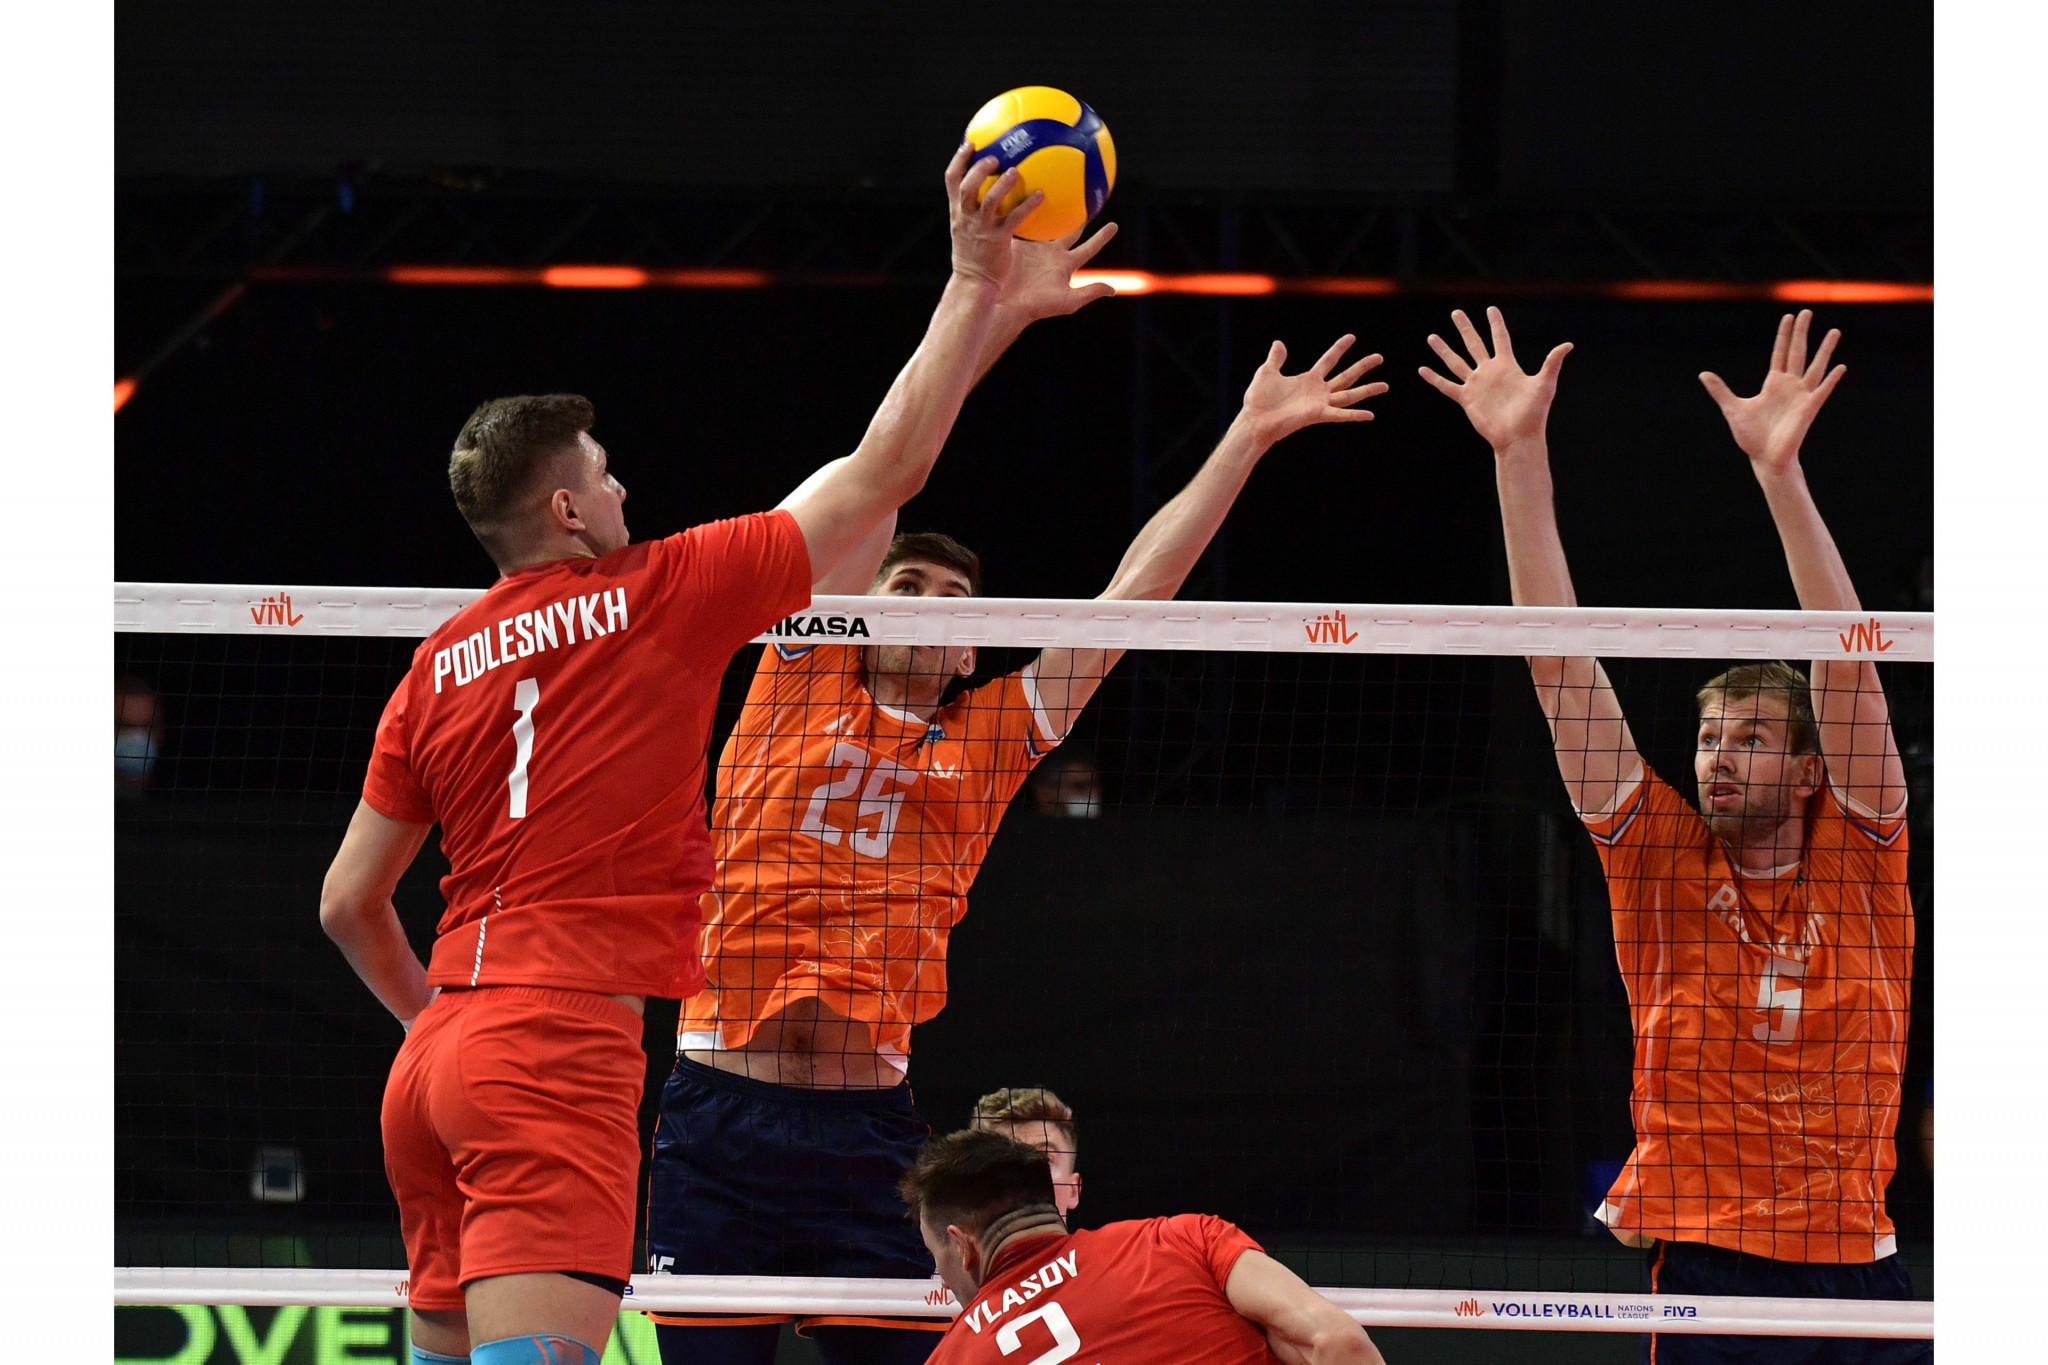 Five countries unbeaten after second day of men’s Volleyball Nations League